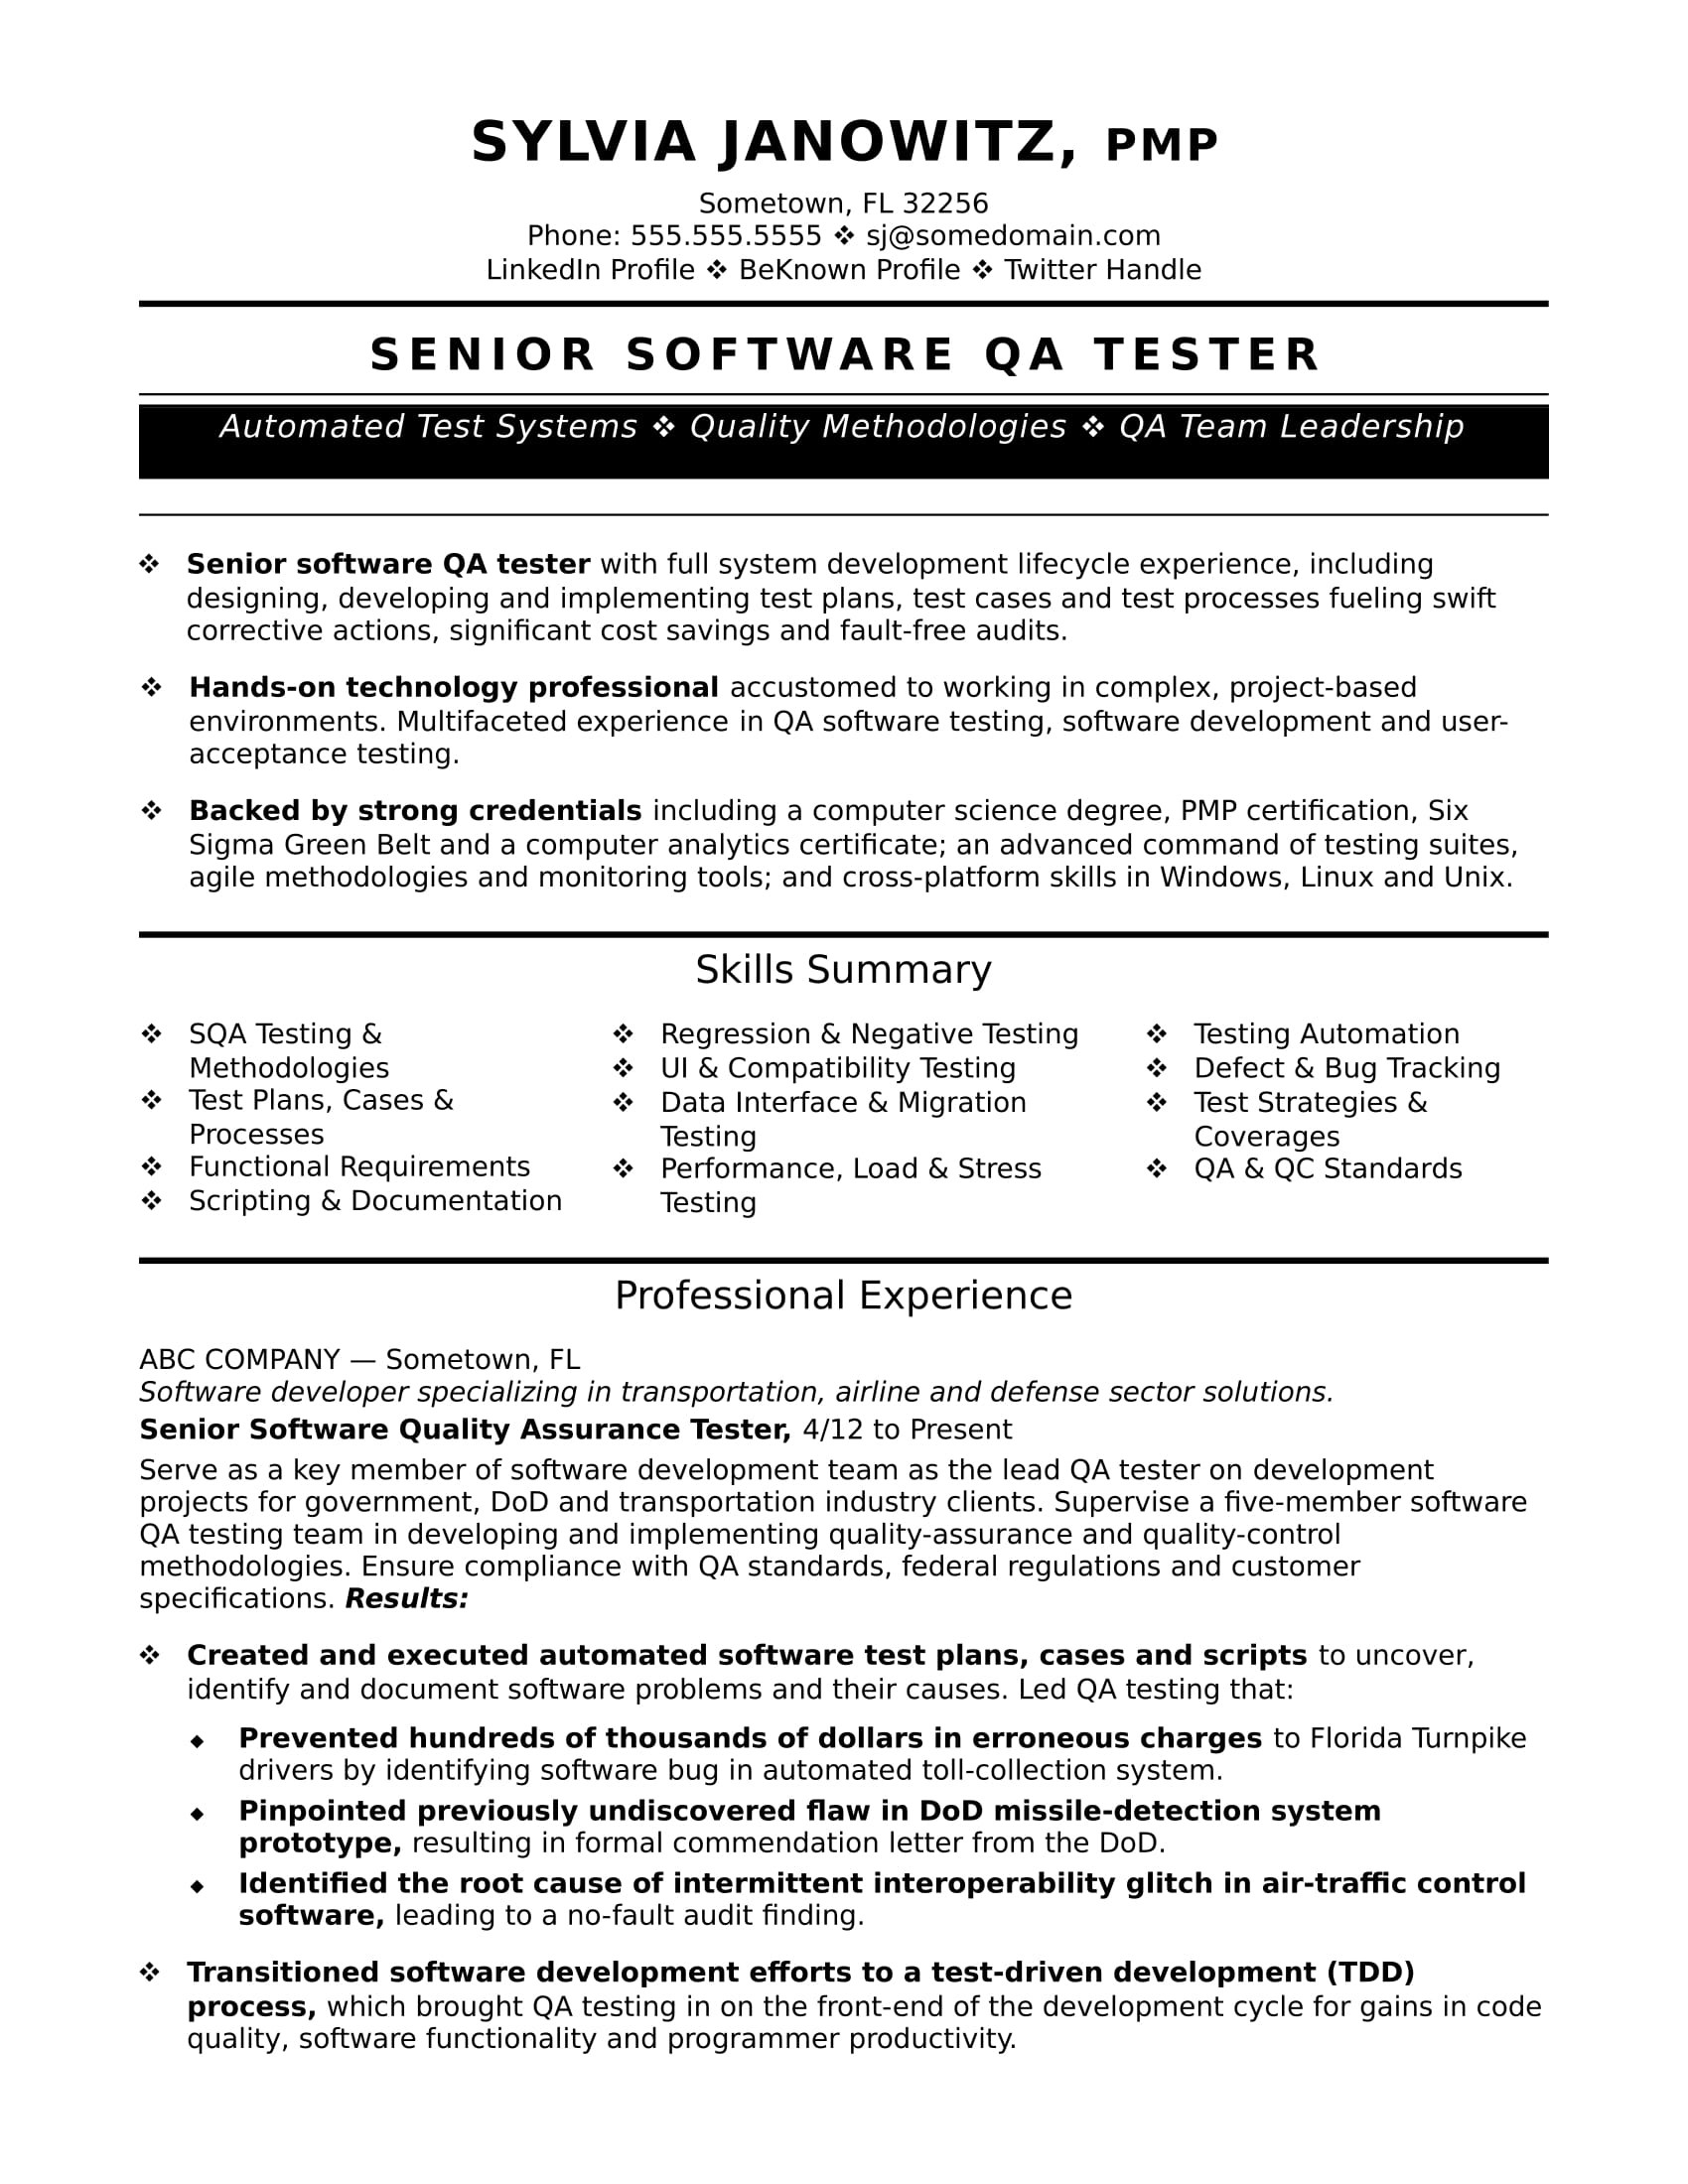 Sample Resume for Uft Automation Tester Experienced Qa software Tester Resume Sample Monster.com